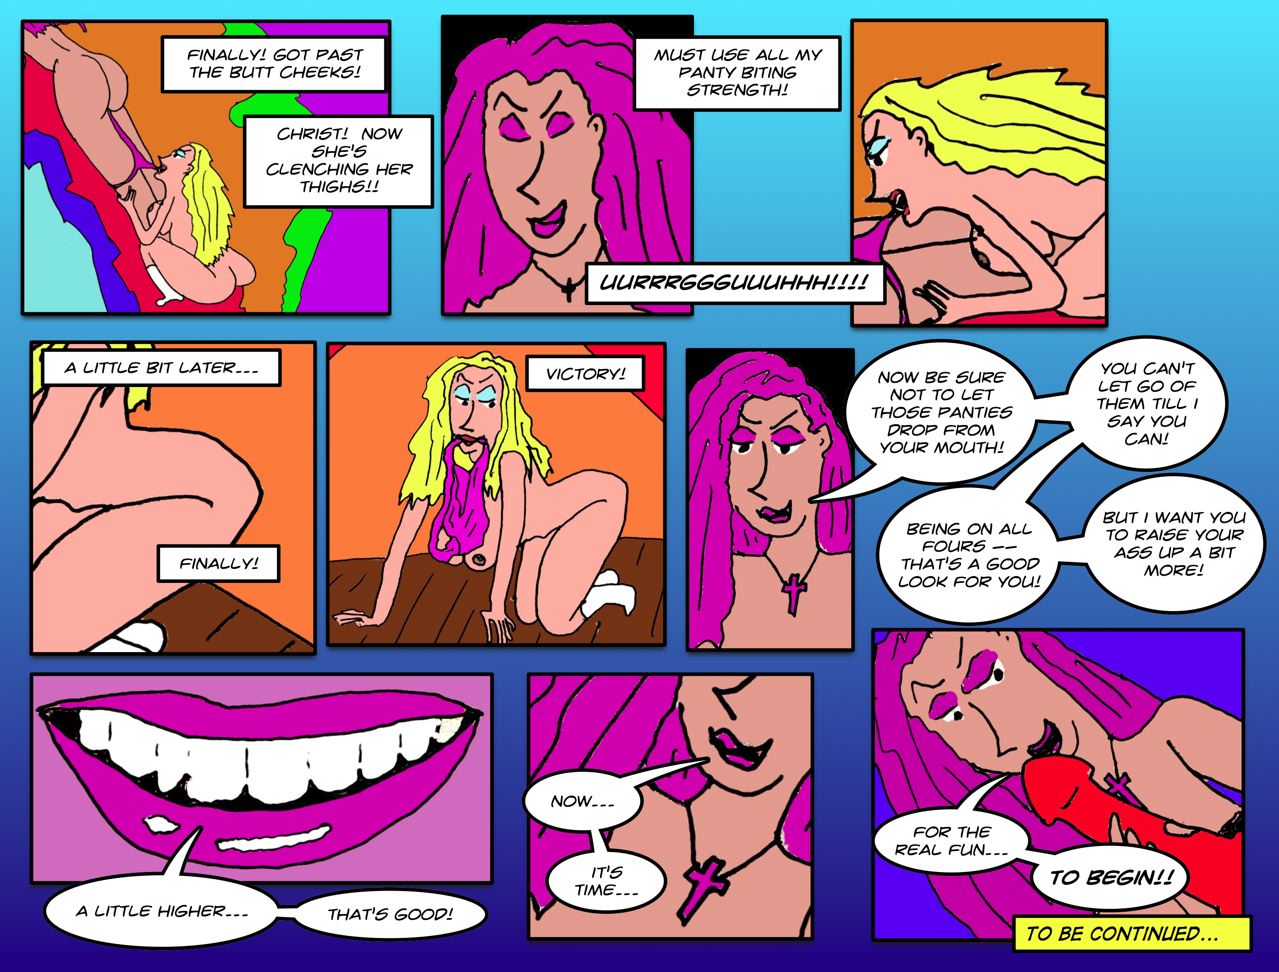 No real panties were harmed in the making of this webcomic.